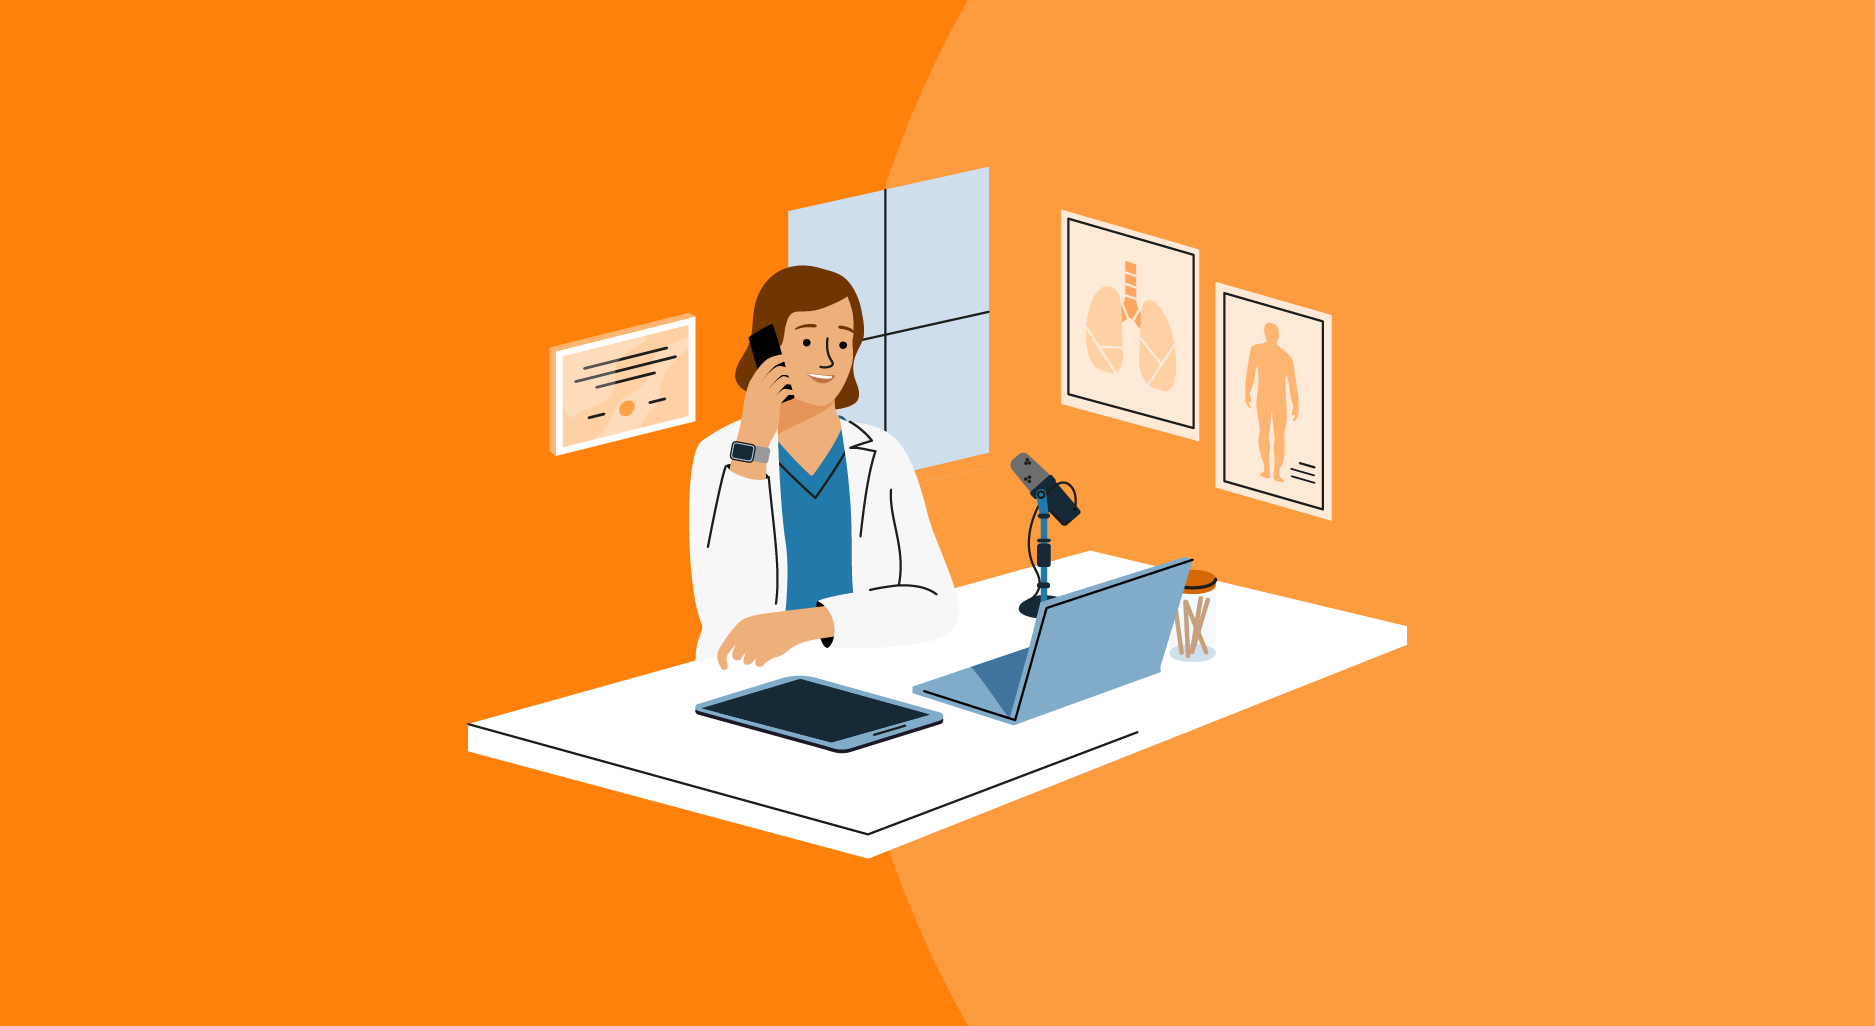 What Hardware and Software Are Used for Telemedicine